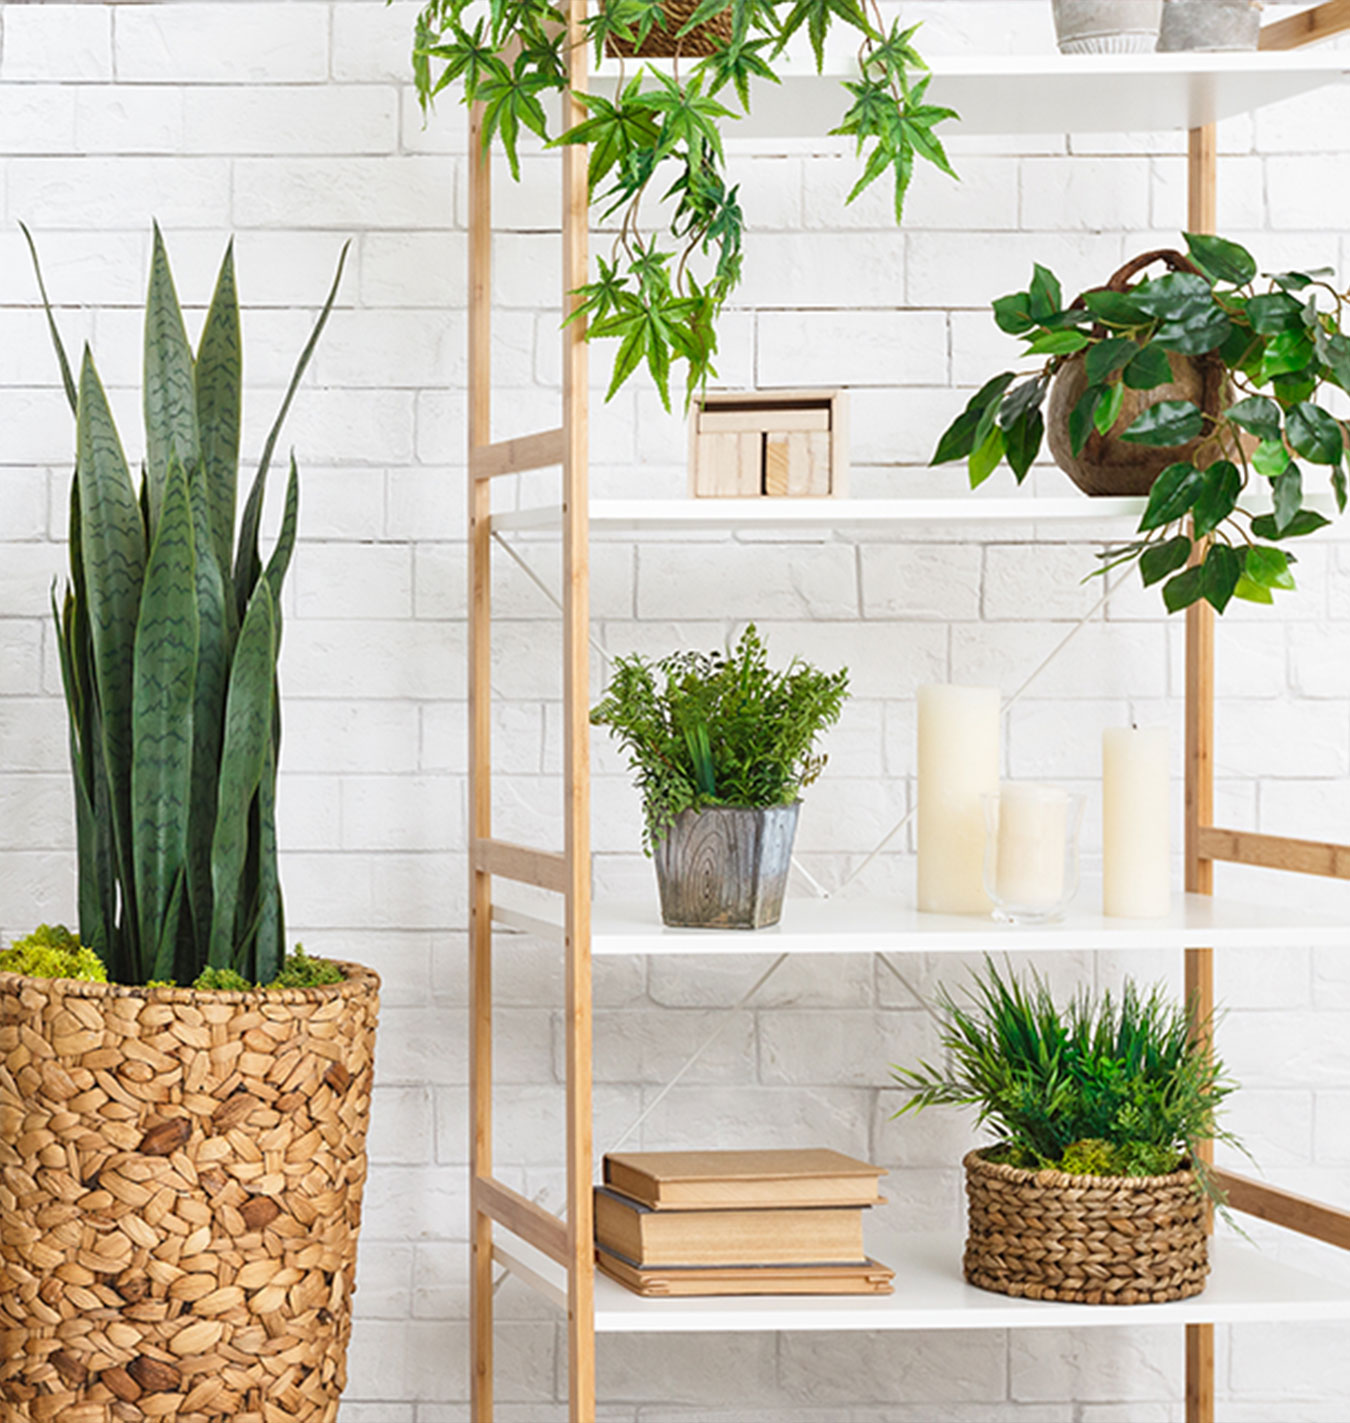 Top 5 Plant Styling Trends